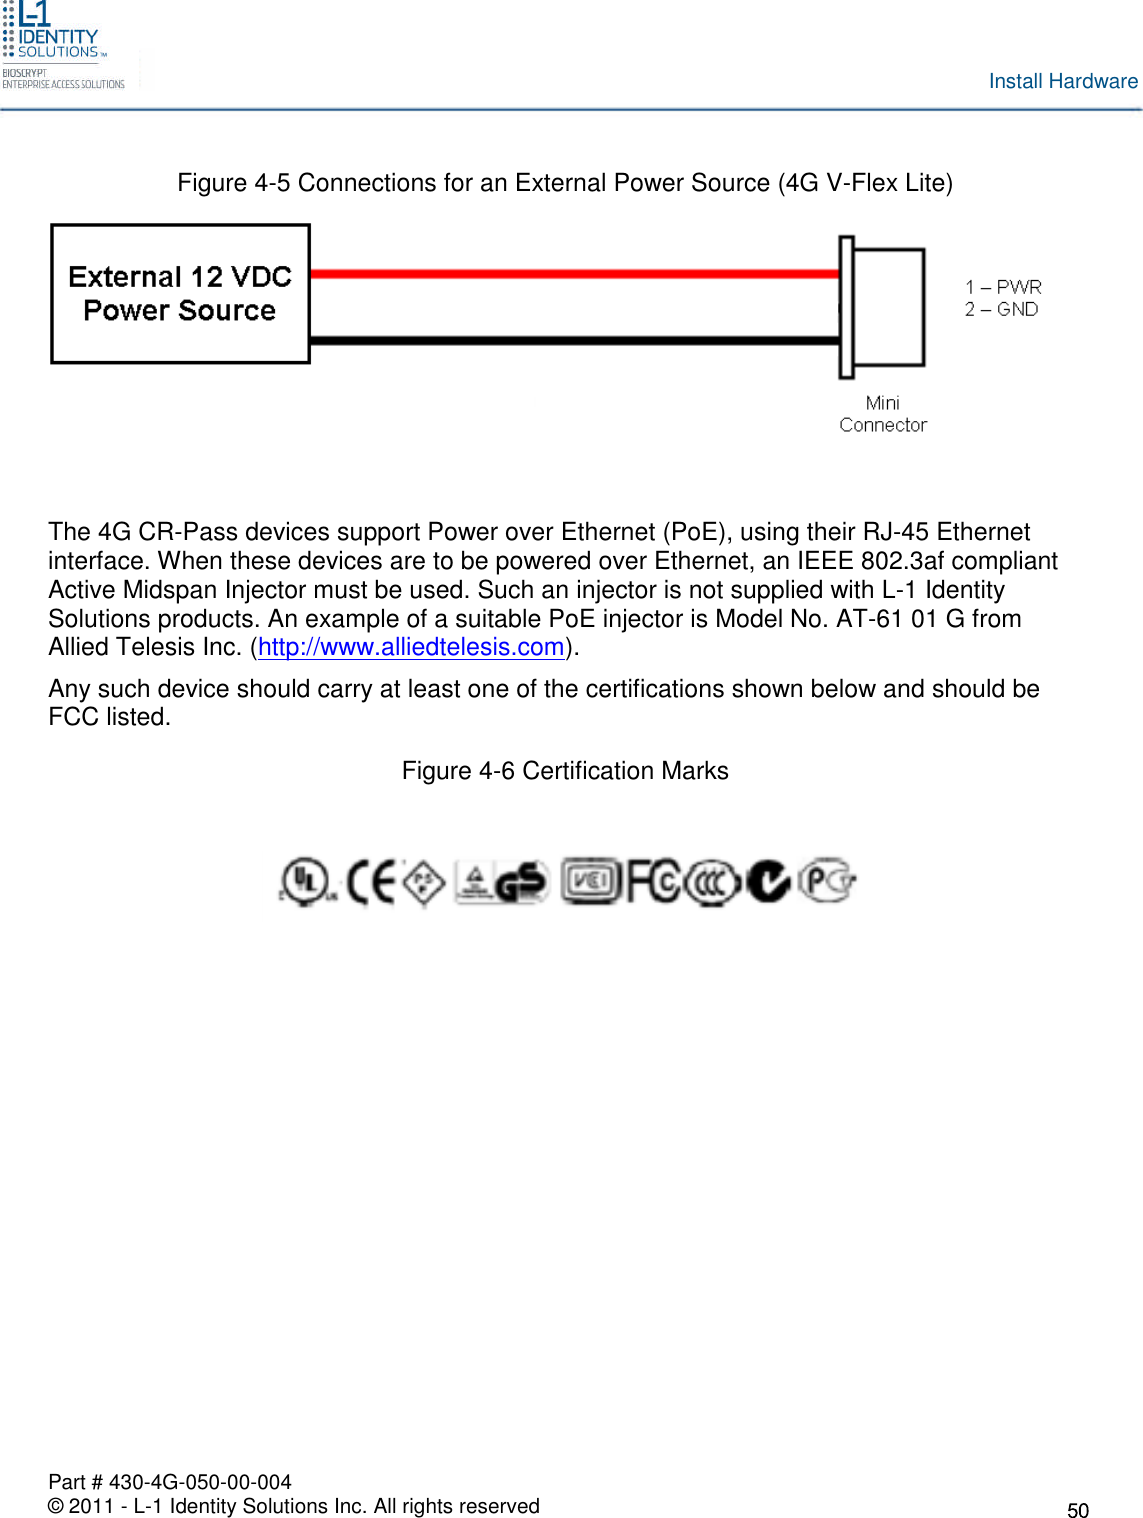 Part # 430-4G-050-00-004© 2011 - L-1 Identity Solutions Inc. All rights reservedInstall HardwareFigure 4-5 Connections for an External Power Source (4G V-Flex Lite)The 4G CR-Pass devices support Power over Ethernet (PoE), using their RJ-45 Ethernetinterface. When these devices are to be powered over Ethernet, an IEEE 802.3af compliantActive Midspan Injector must be used. Such an injector is not supplied with L-1 IdentitySolutions products. An example of a suitable PoE injector is Model No. AT-61 01 G fromAllied Telesis Inc. (http://www.alliedtelesis.com).Any such device should carry at least one of the certifications shown below and should beFCC listed.Figure 4-6 Certification Marks